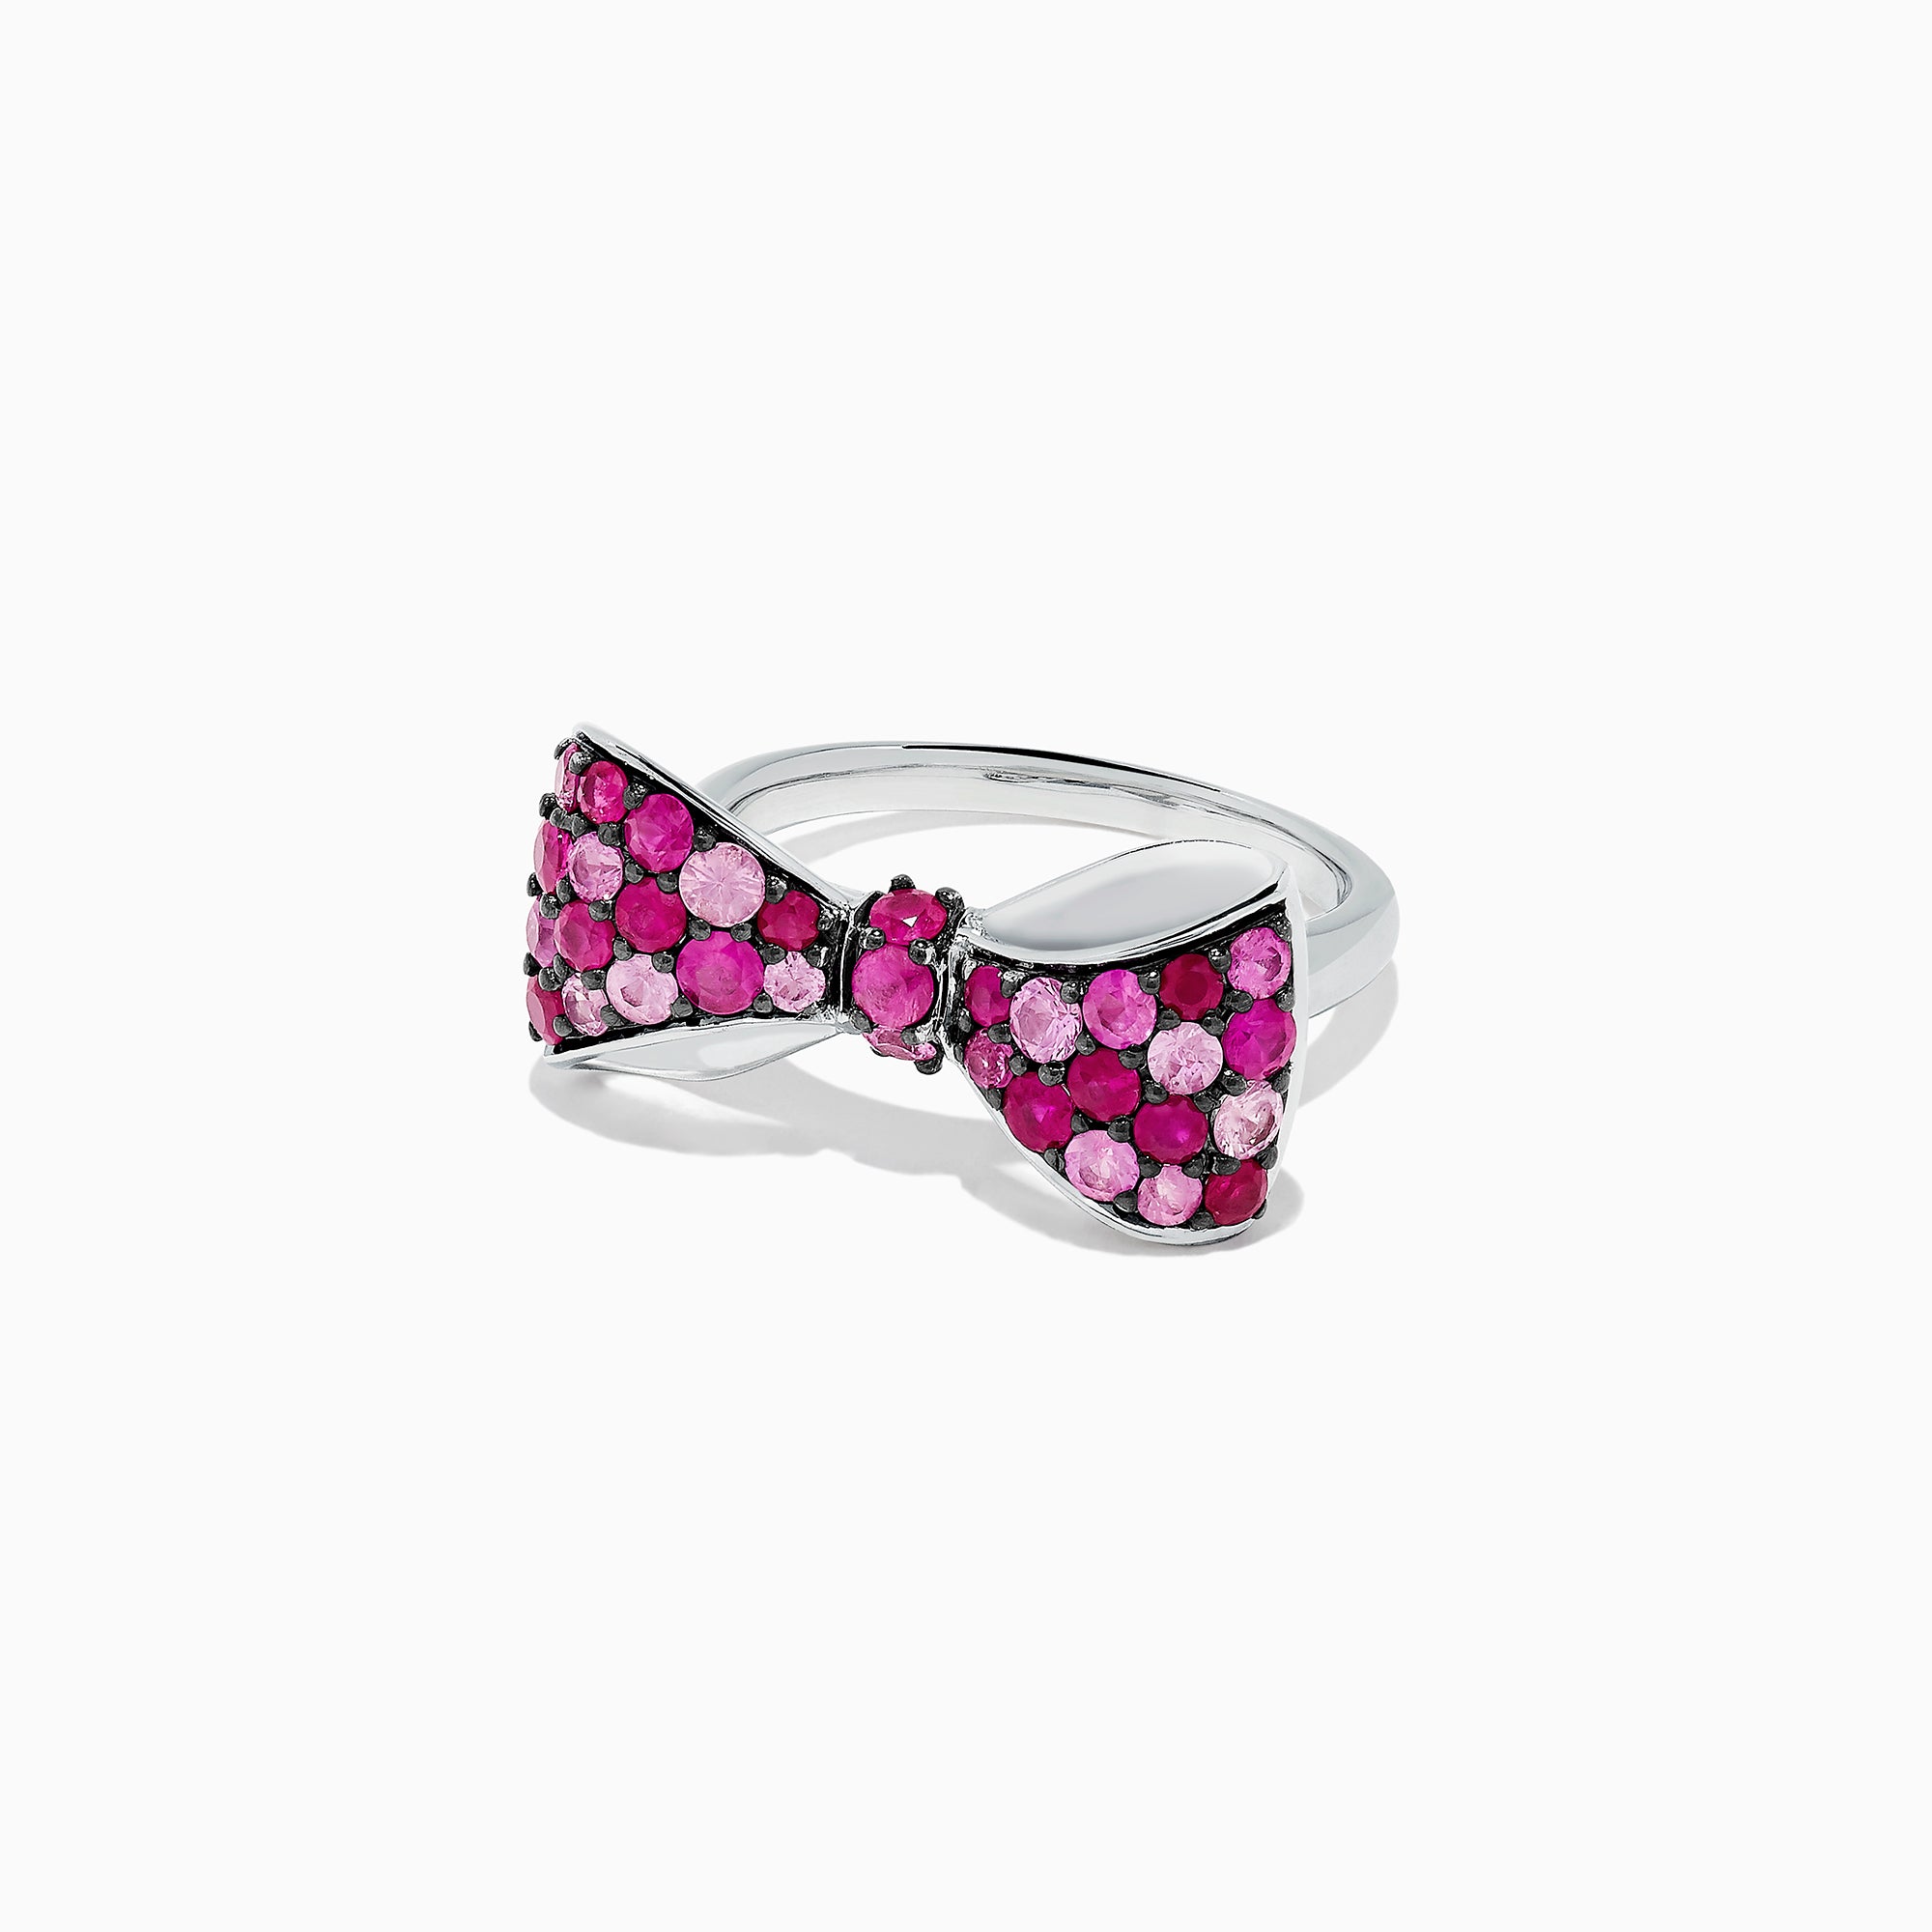 Effy 925 Sterling Silver Ruby and Pink Sapphire Splash Bowtie Ring, 1.80 TCW